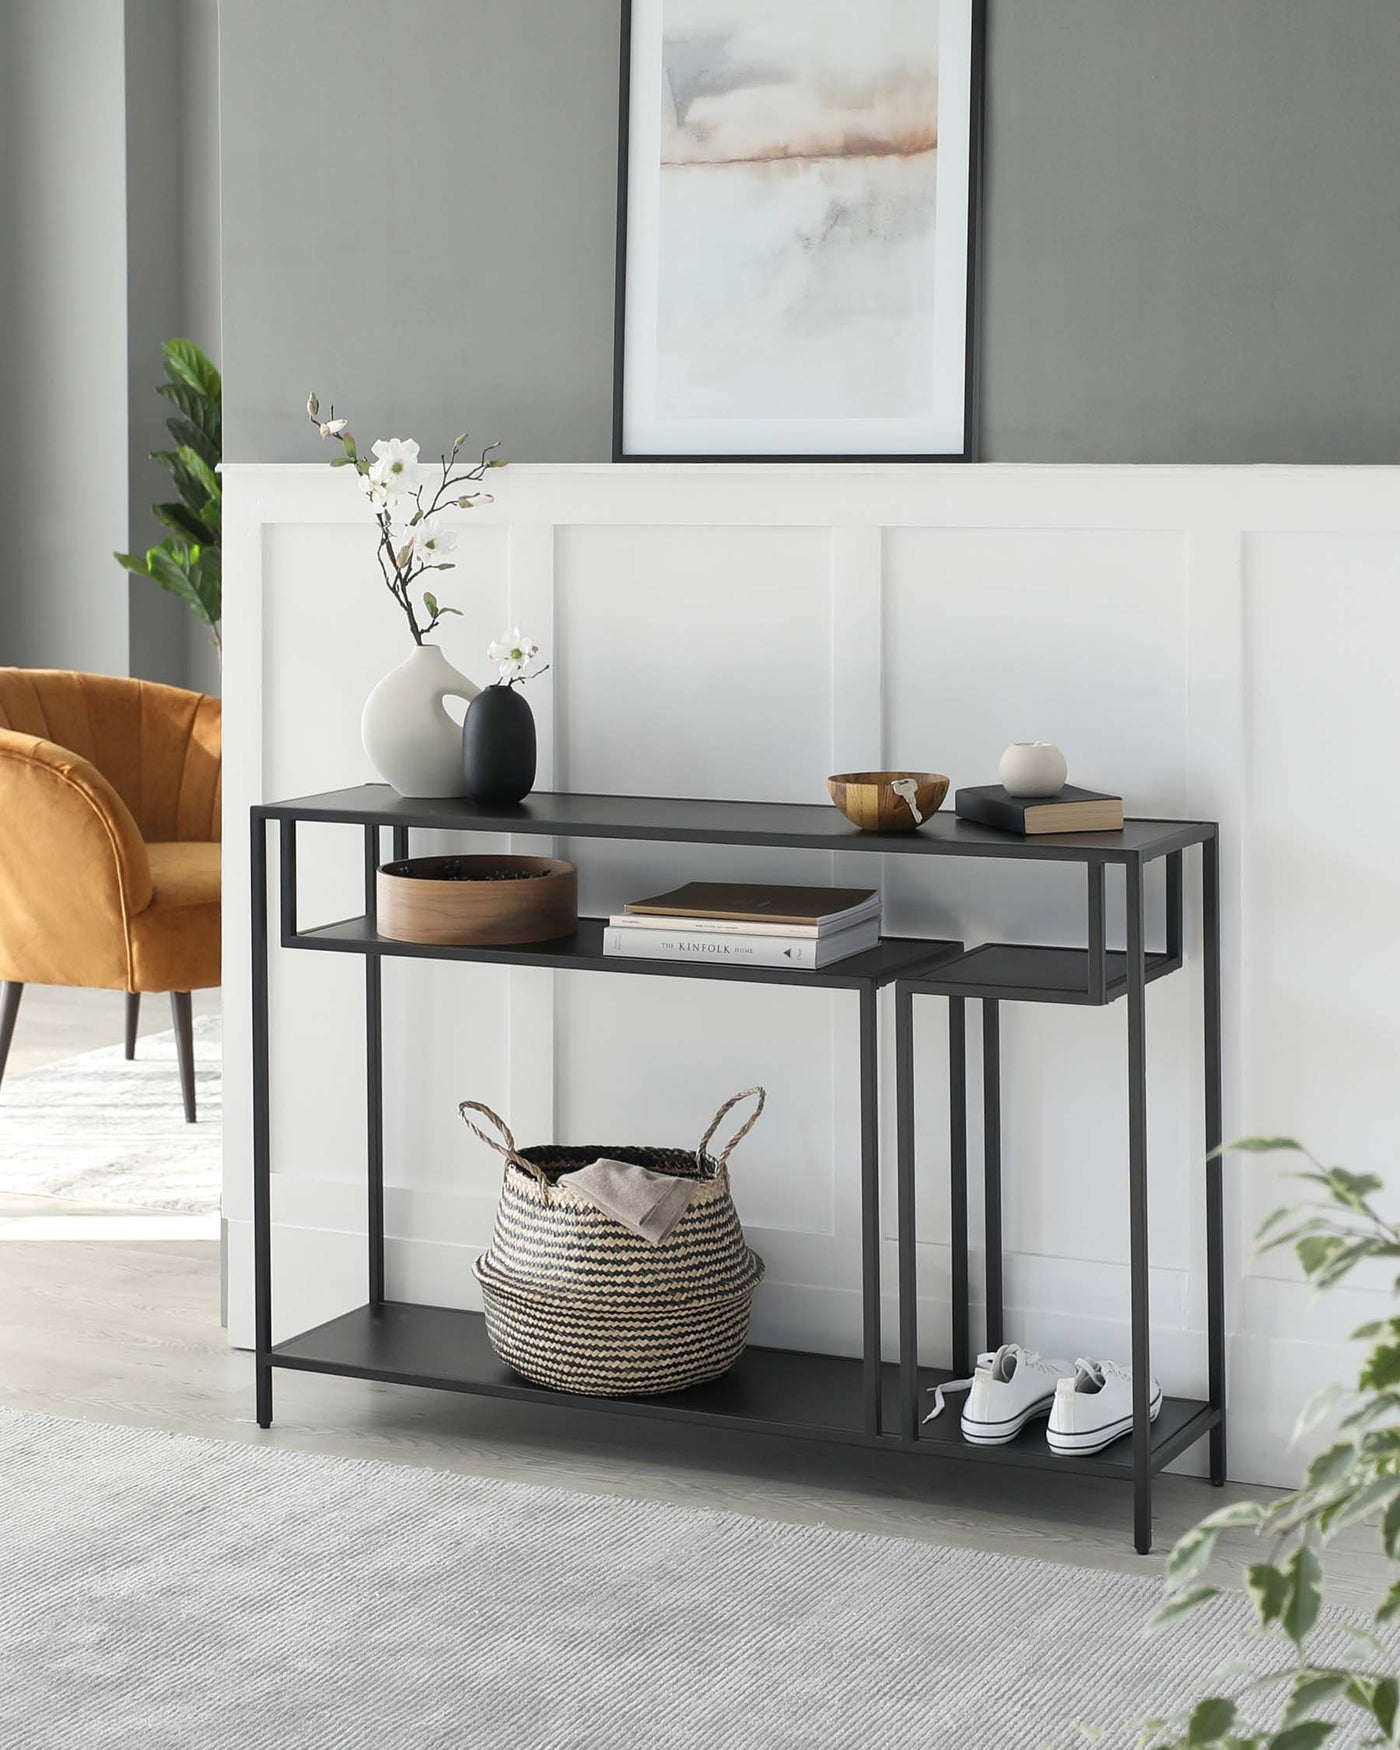 Modern console table with a sleek black metal frame and two-tiered tabletop in a contrasting light wood finish, ideal for hallway or living room decor.